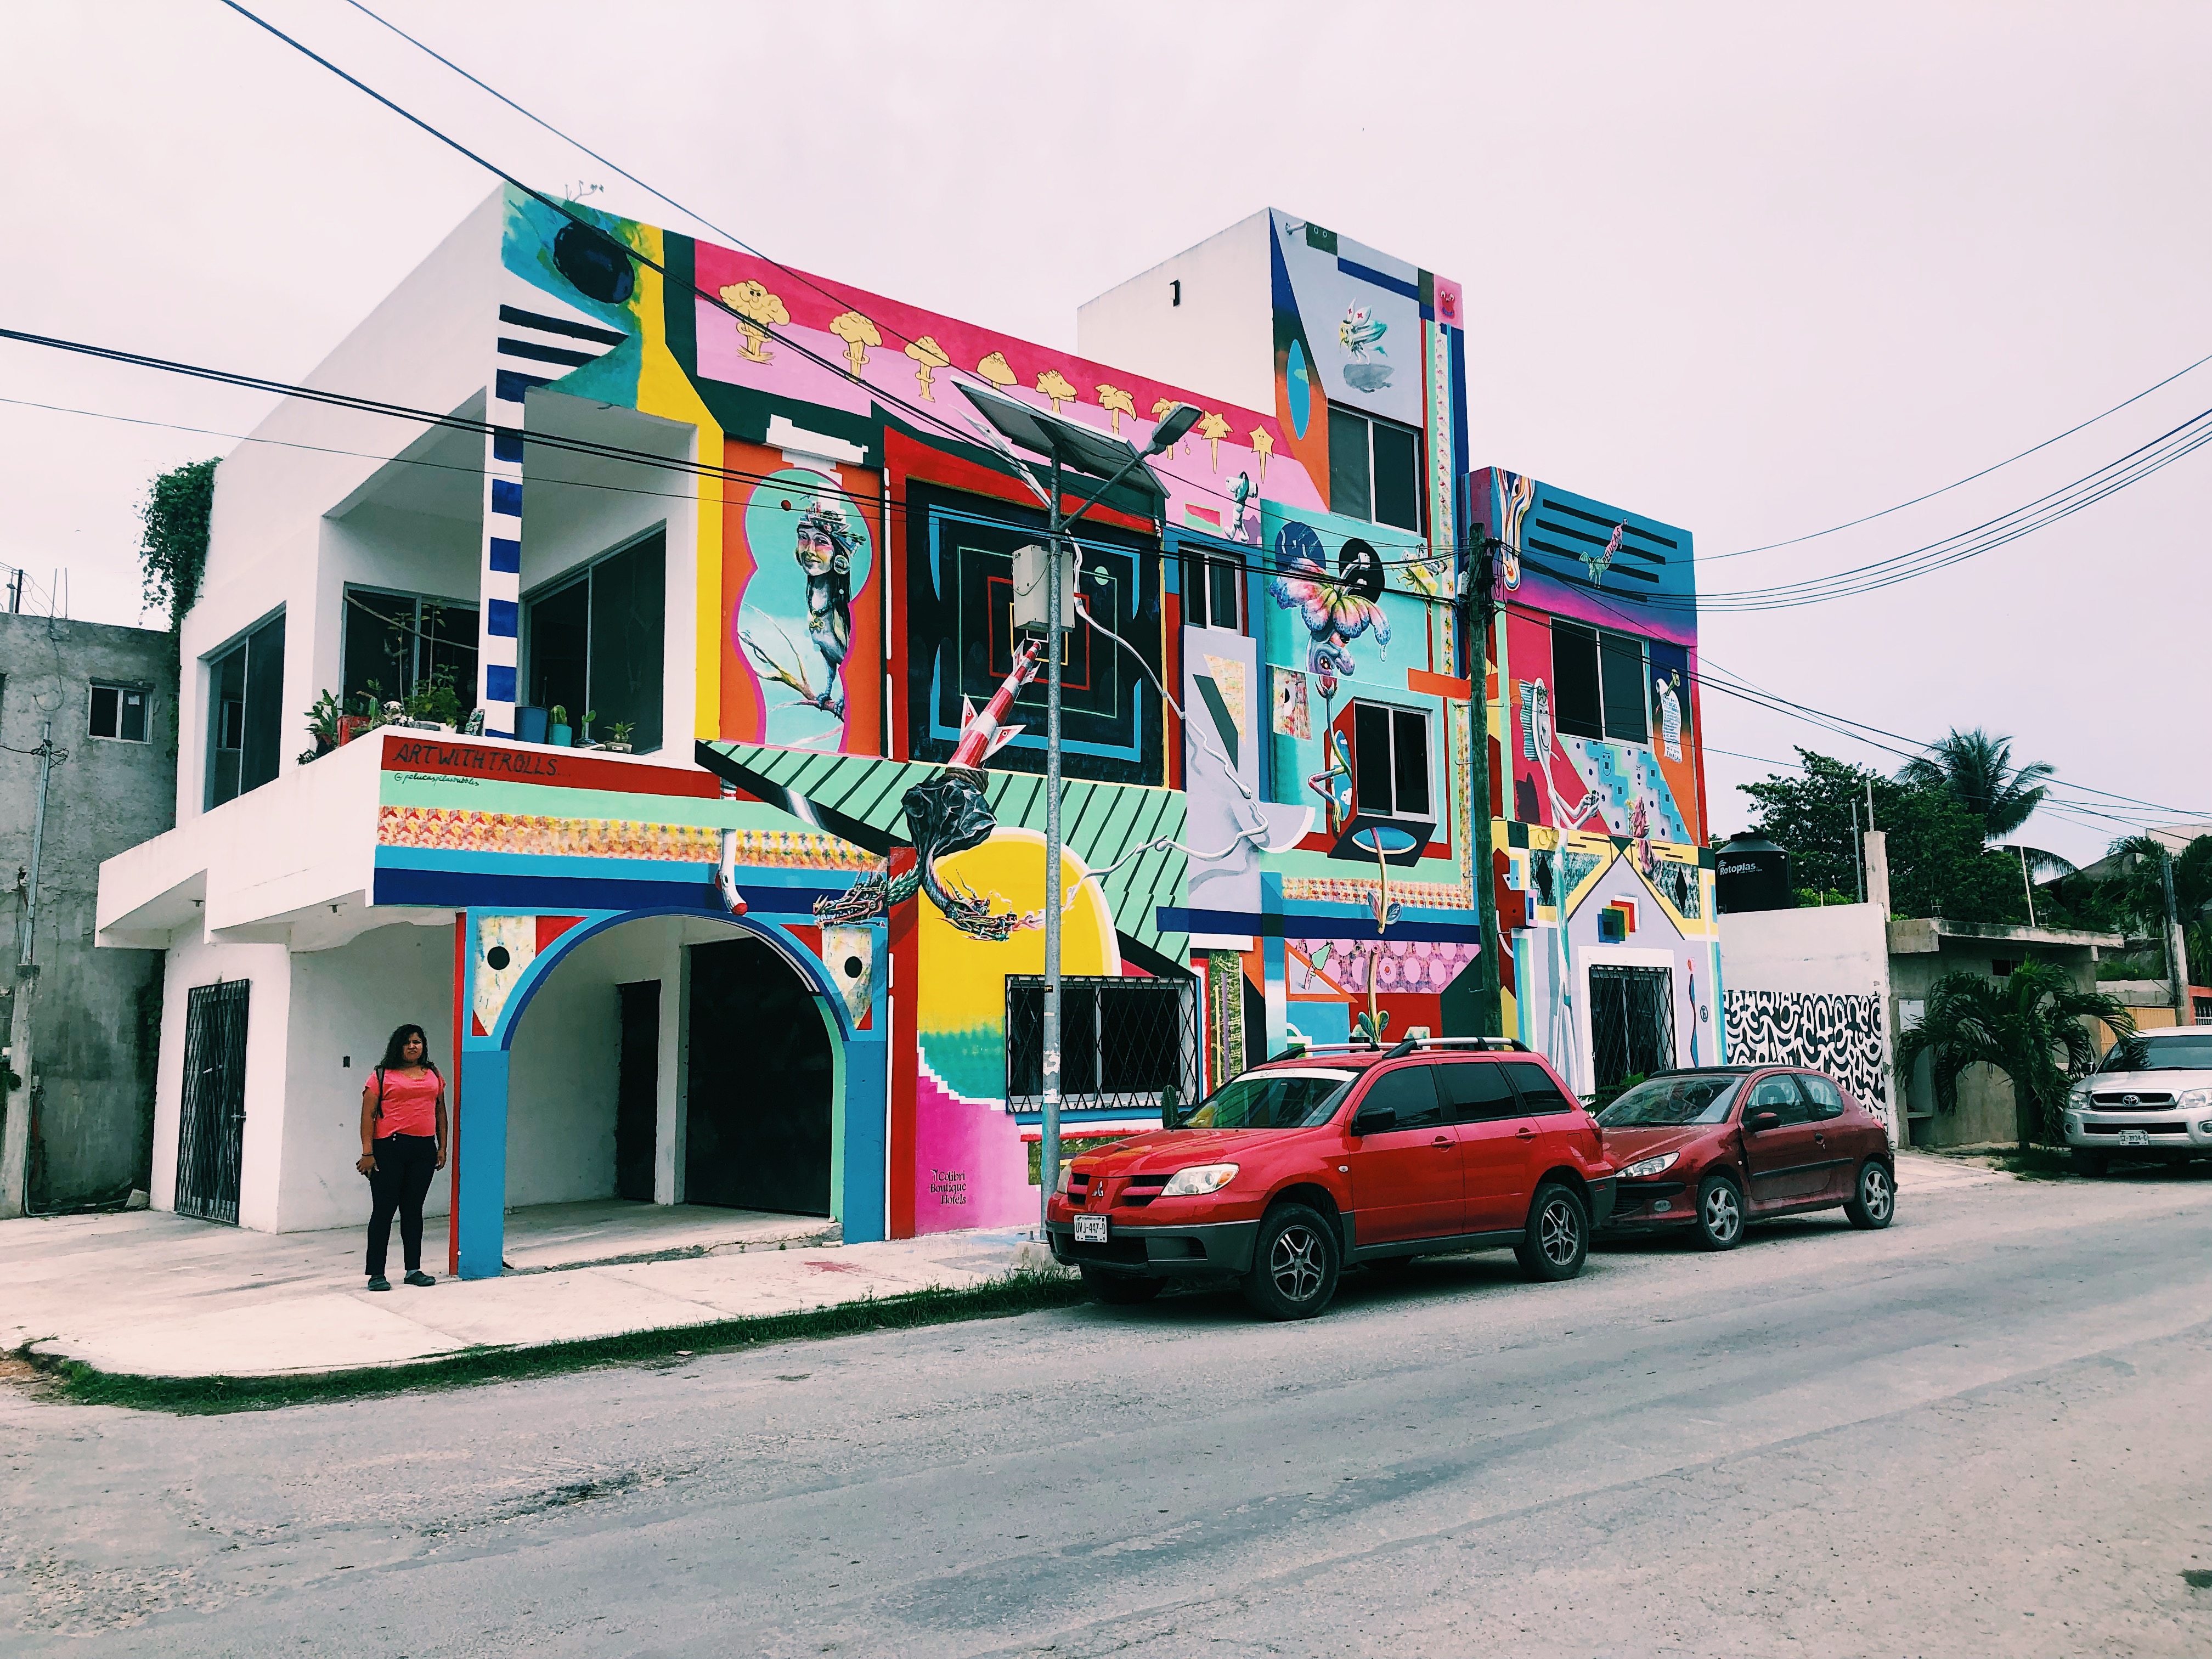 A colourful building in the streets of Tulum.